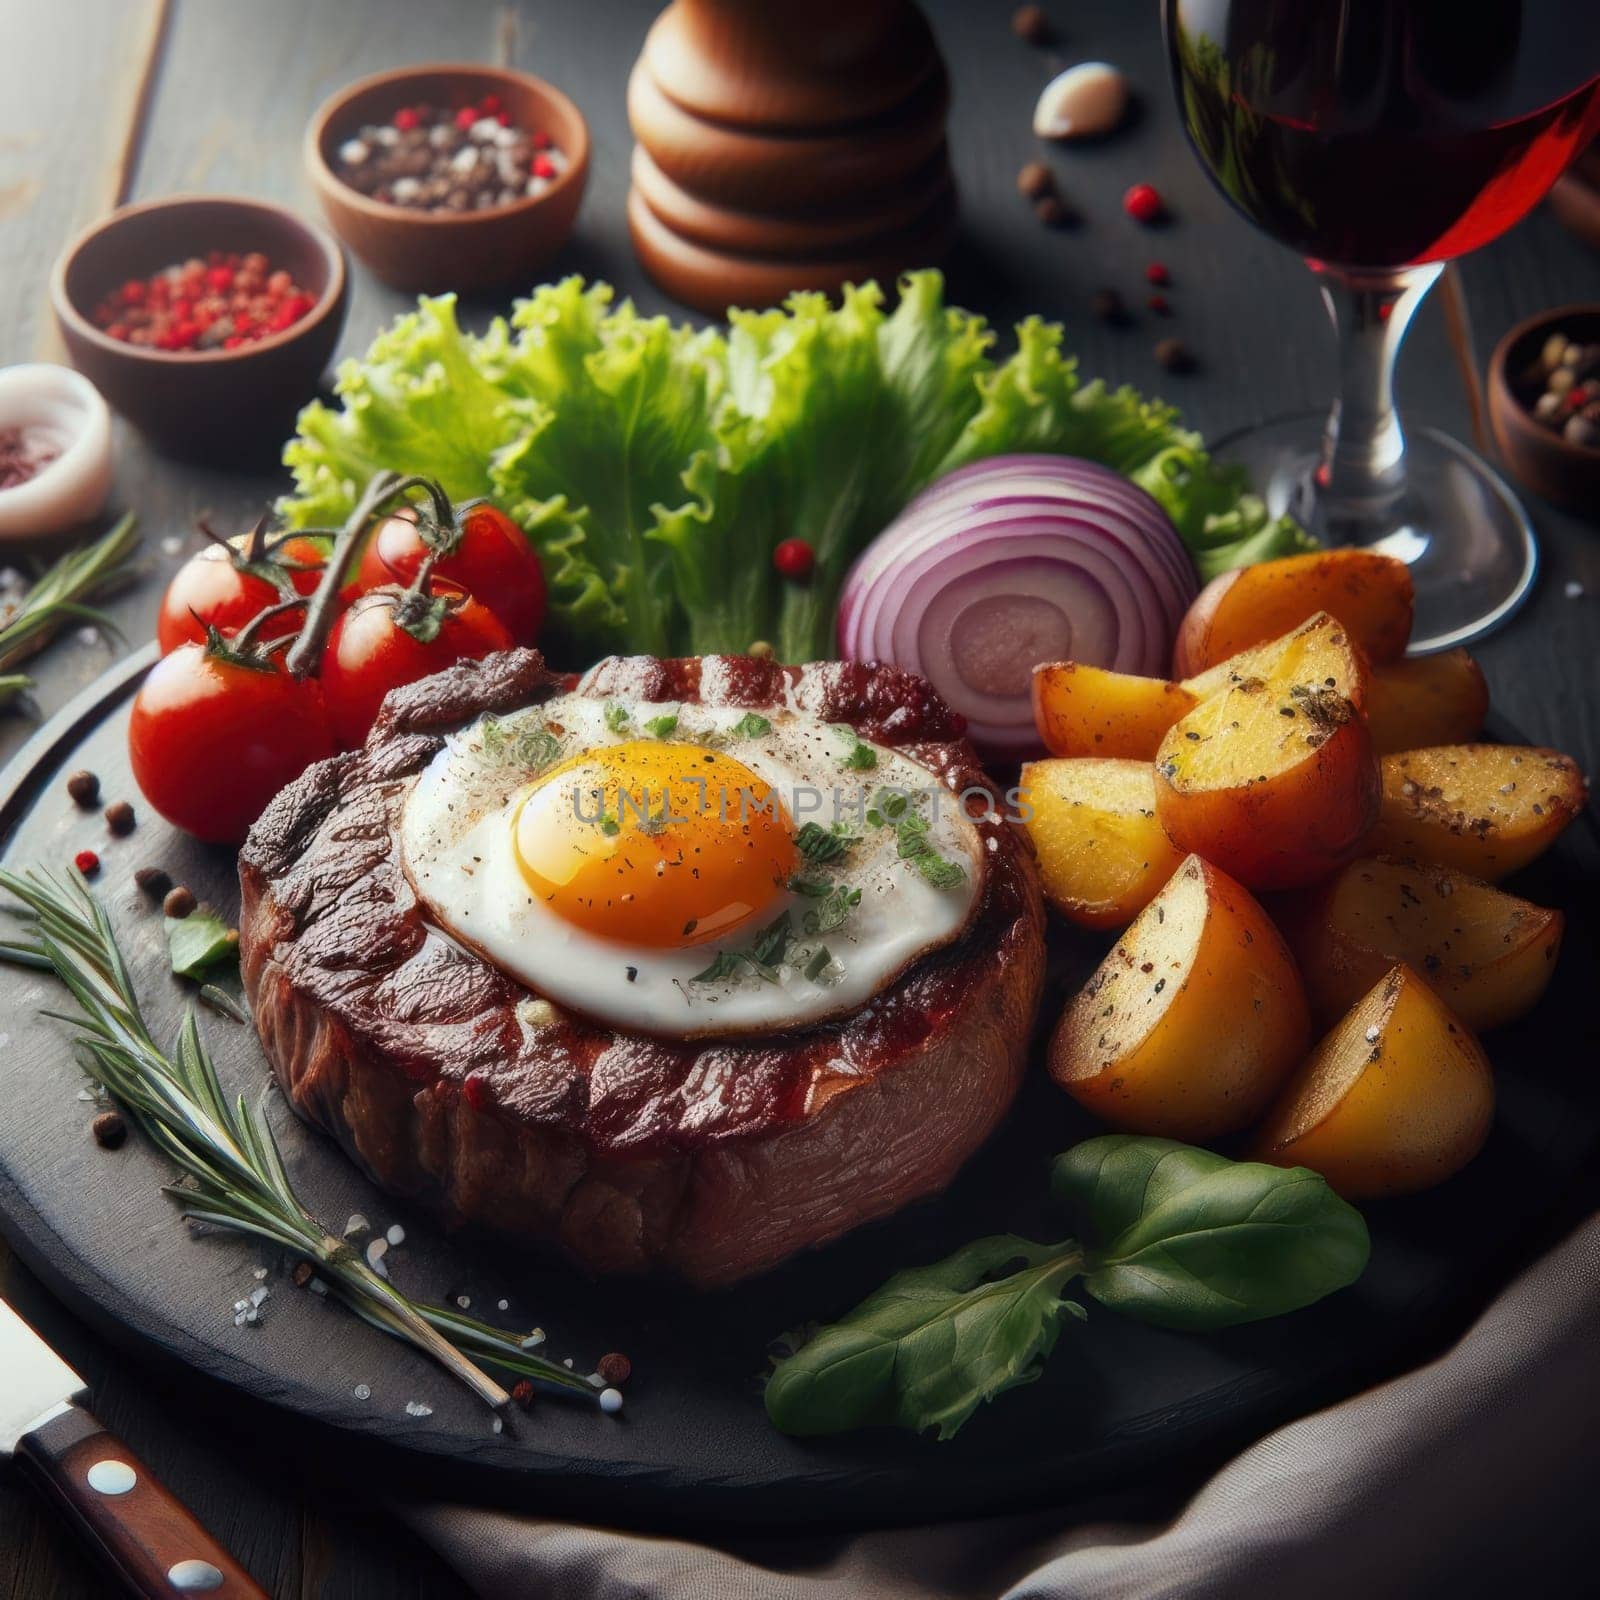 Still life with prepared food: on a wooden board a piece of fried meat with an egg, slices of fried potatoes and a glass of red wine. Spices, herbs, tomatoes and onions